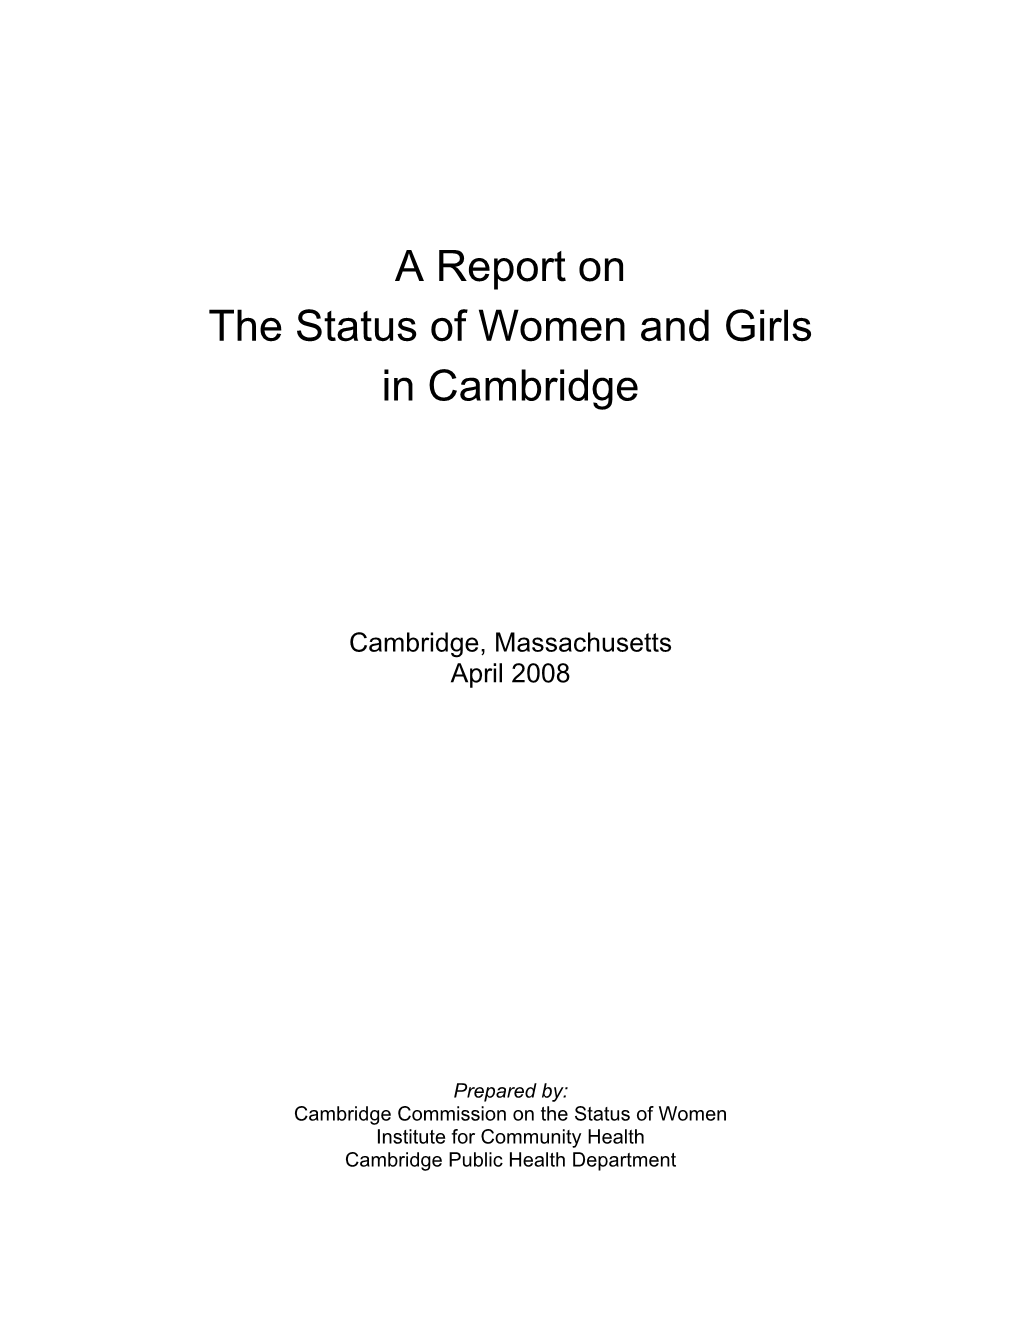 A Report on the Status of Women and Girls in Cambridge